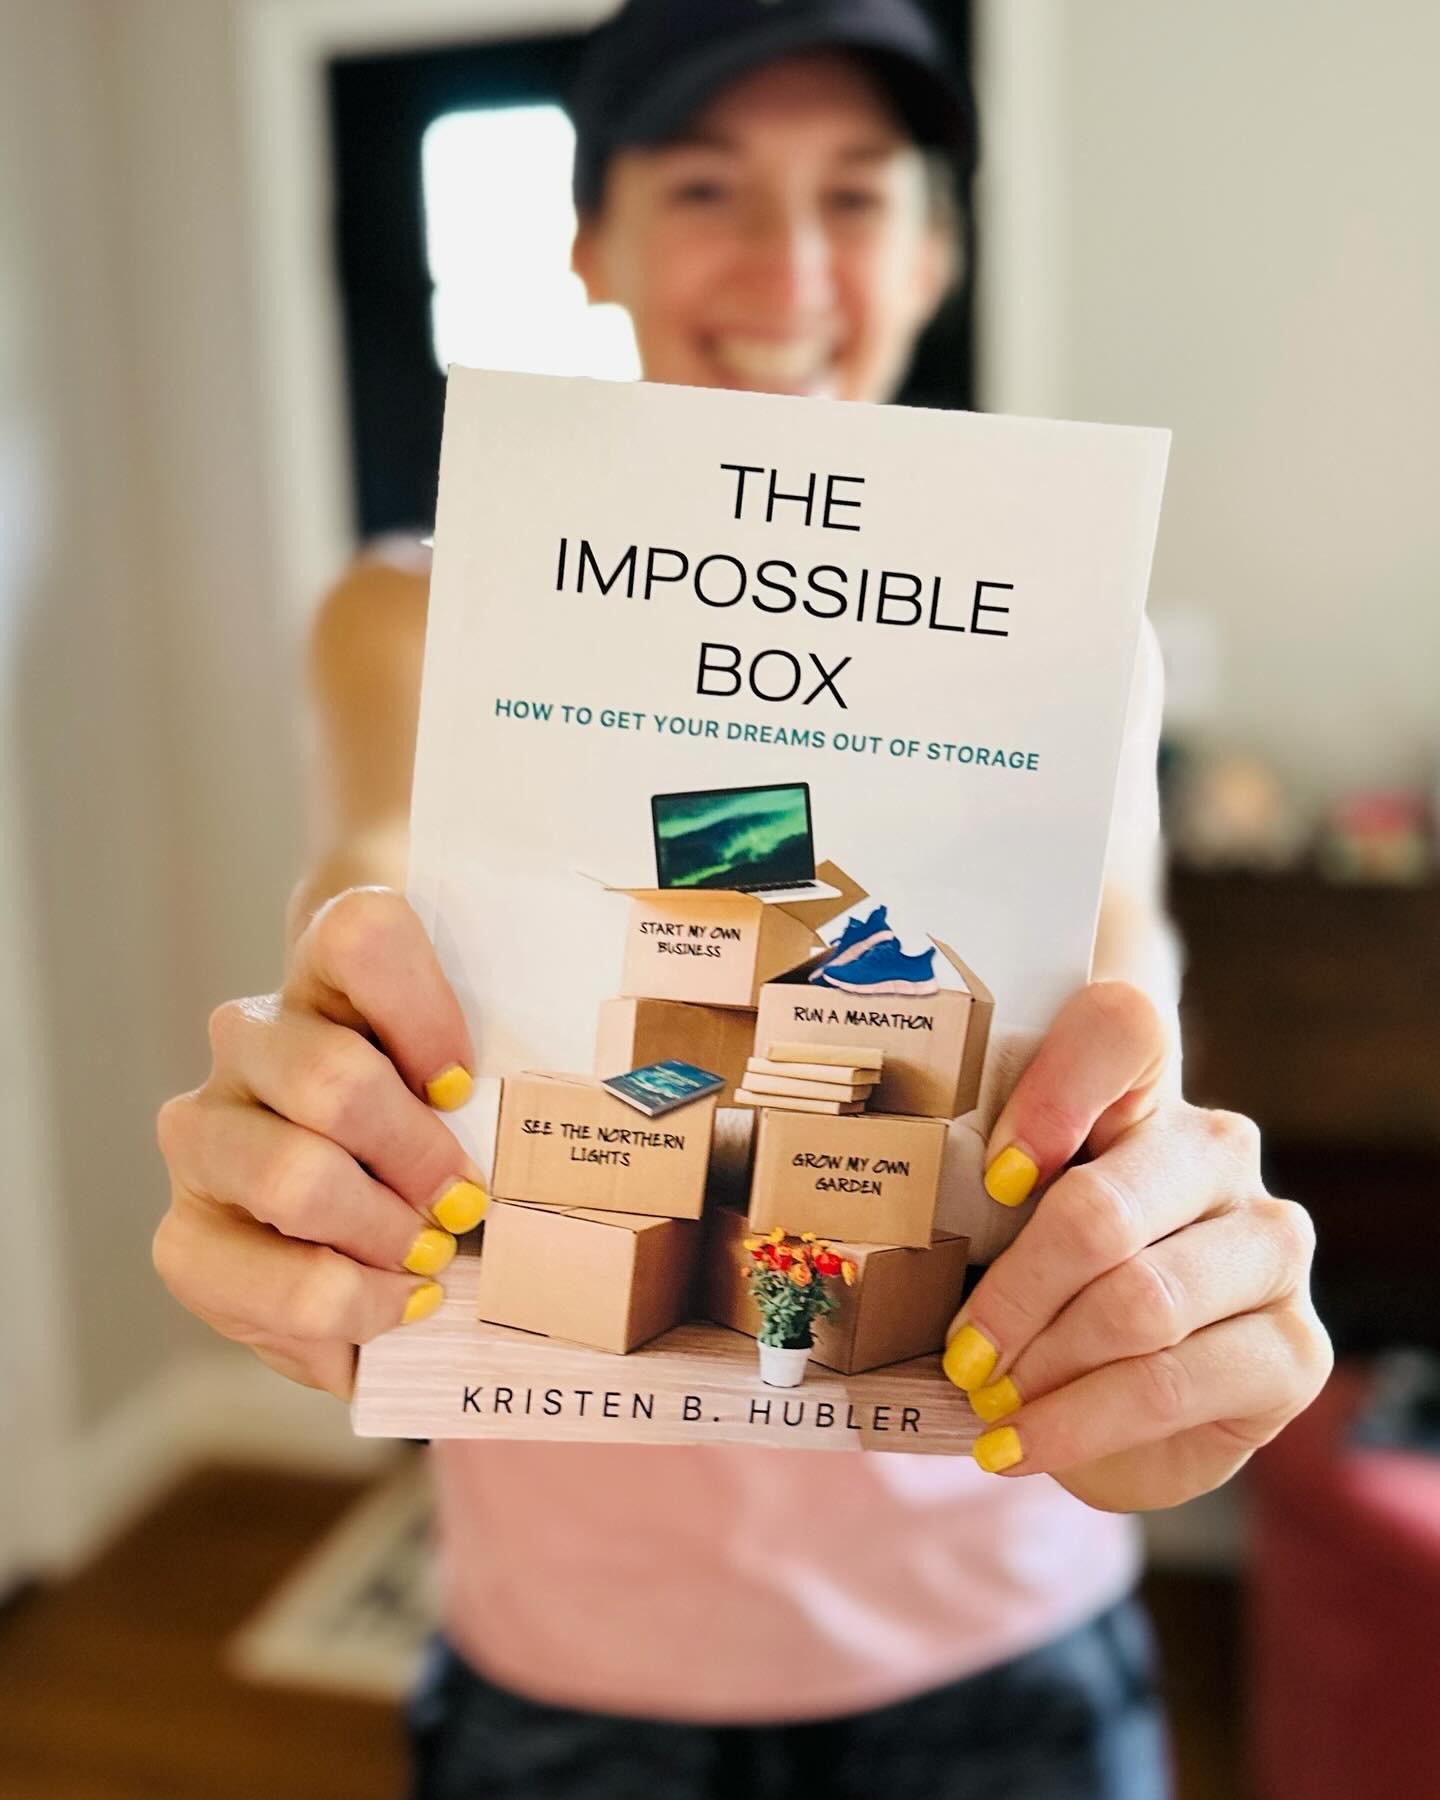 My book baby is 1 year old! Can&rsquo;t believe it&rsquo;s been a year already. Feels like I&rsquo;m still that girl that mumbled quietly &ldquo;one day I&rsquo;d like to write a book.&rdquo; 

Check out The Impossible Box for inspiration and clear s